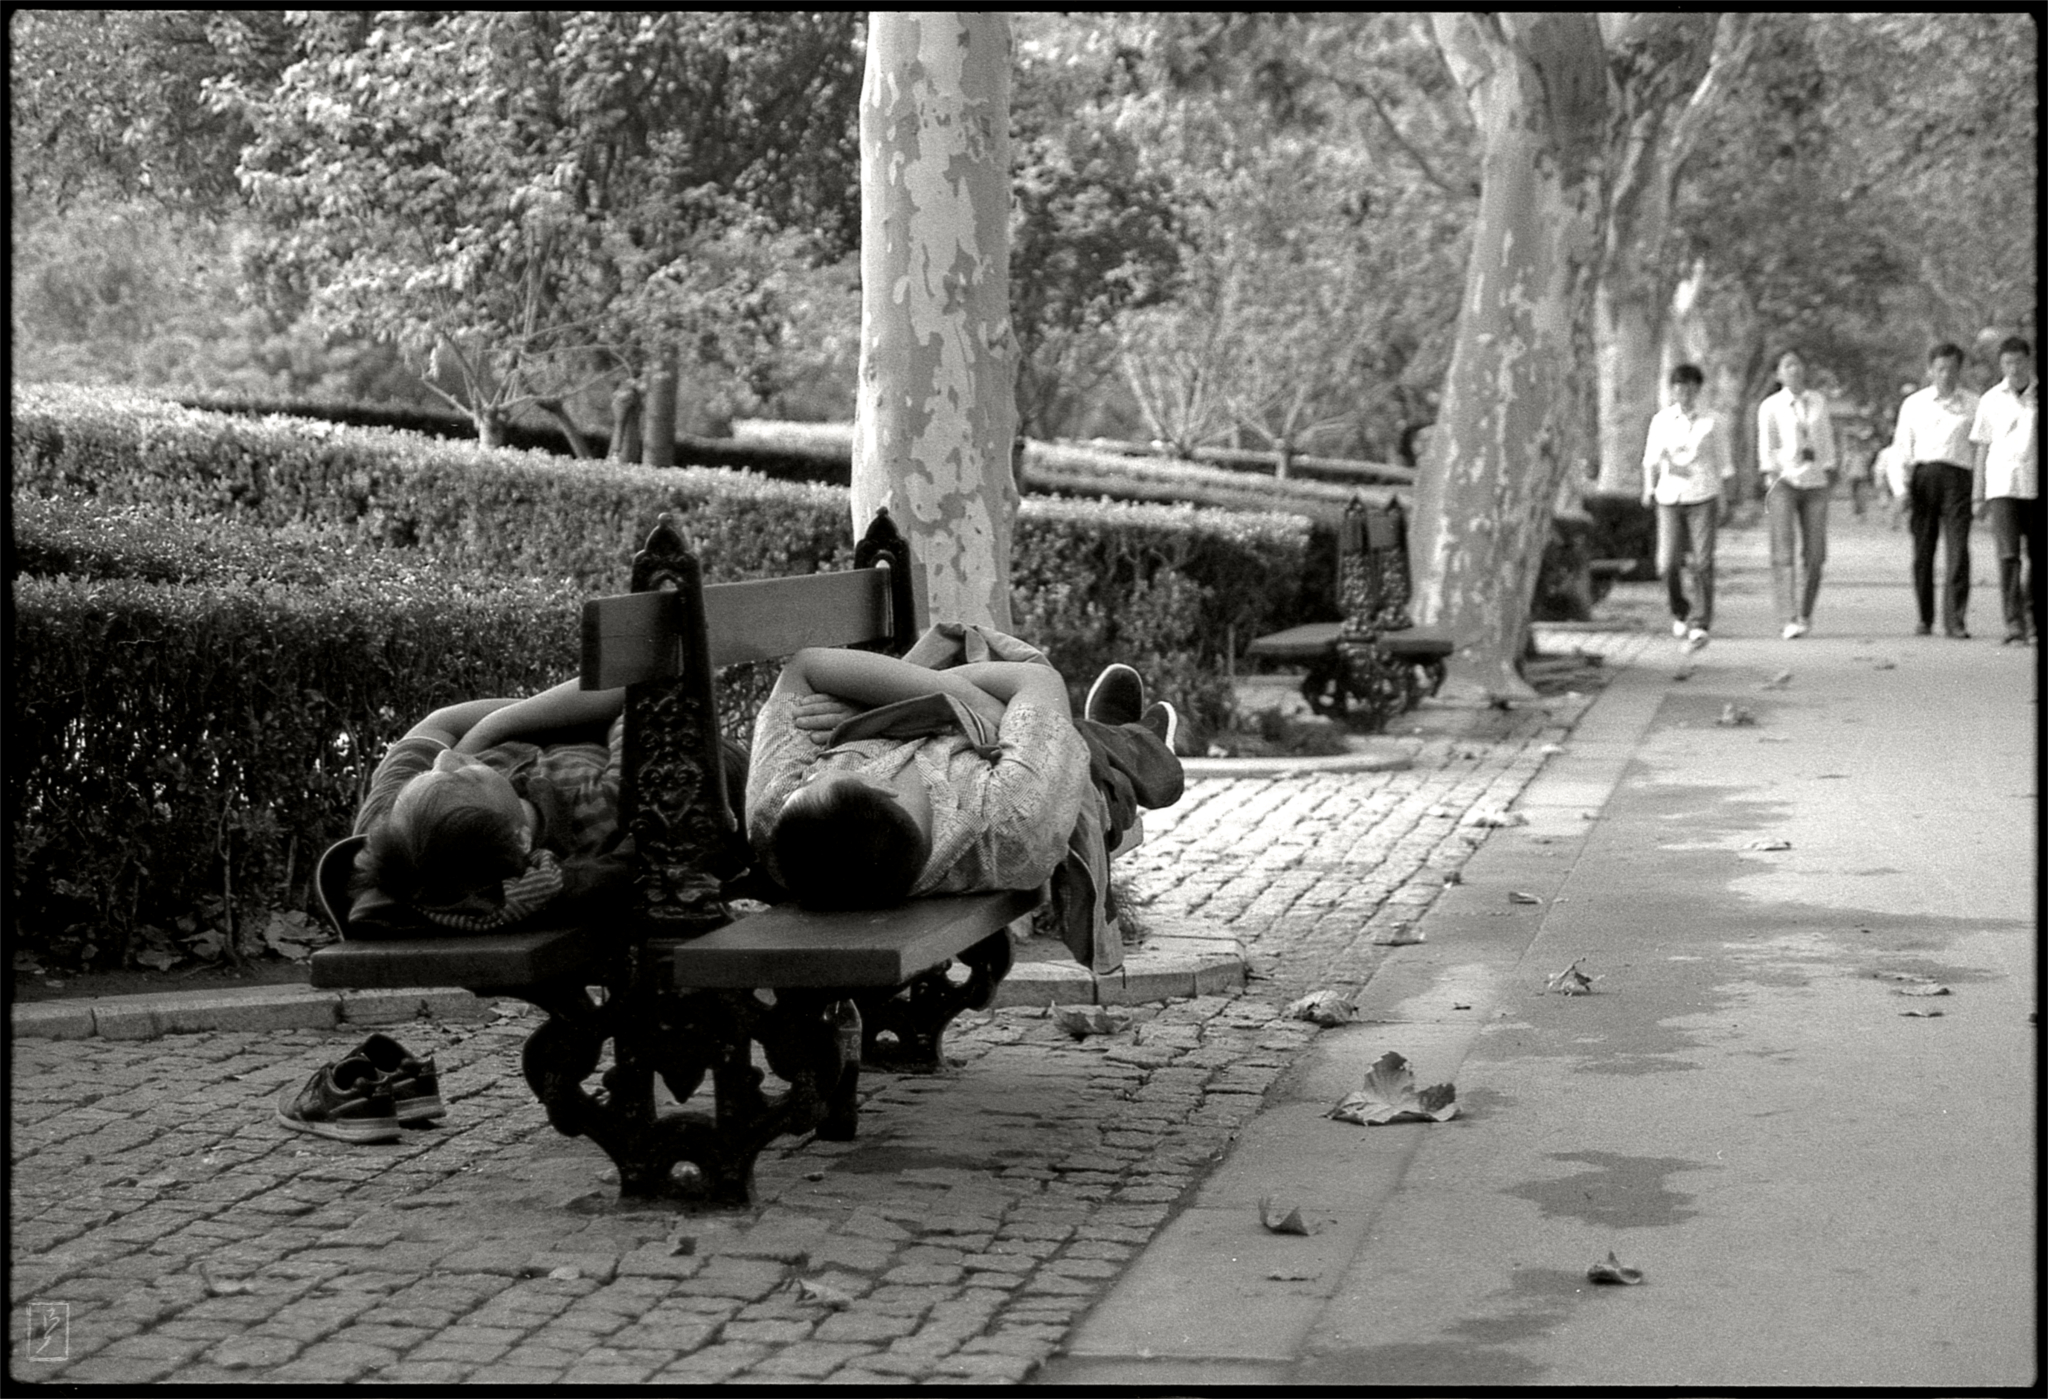 Fuxing park (复兴公园): Lunchtime nap on a bench.